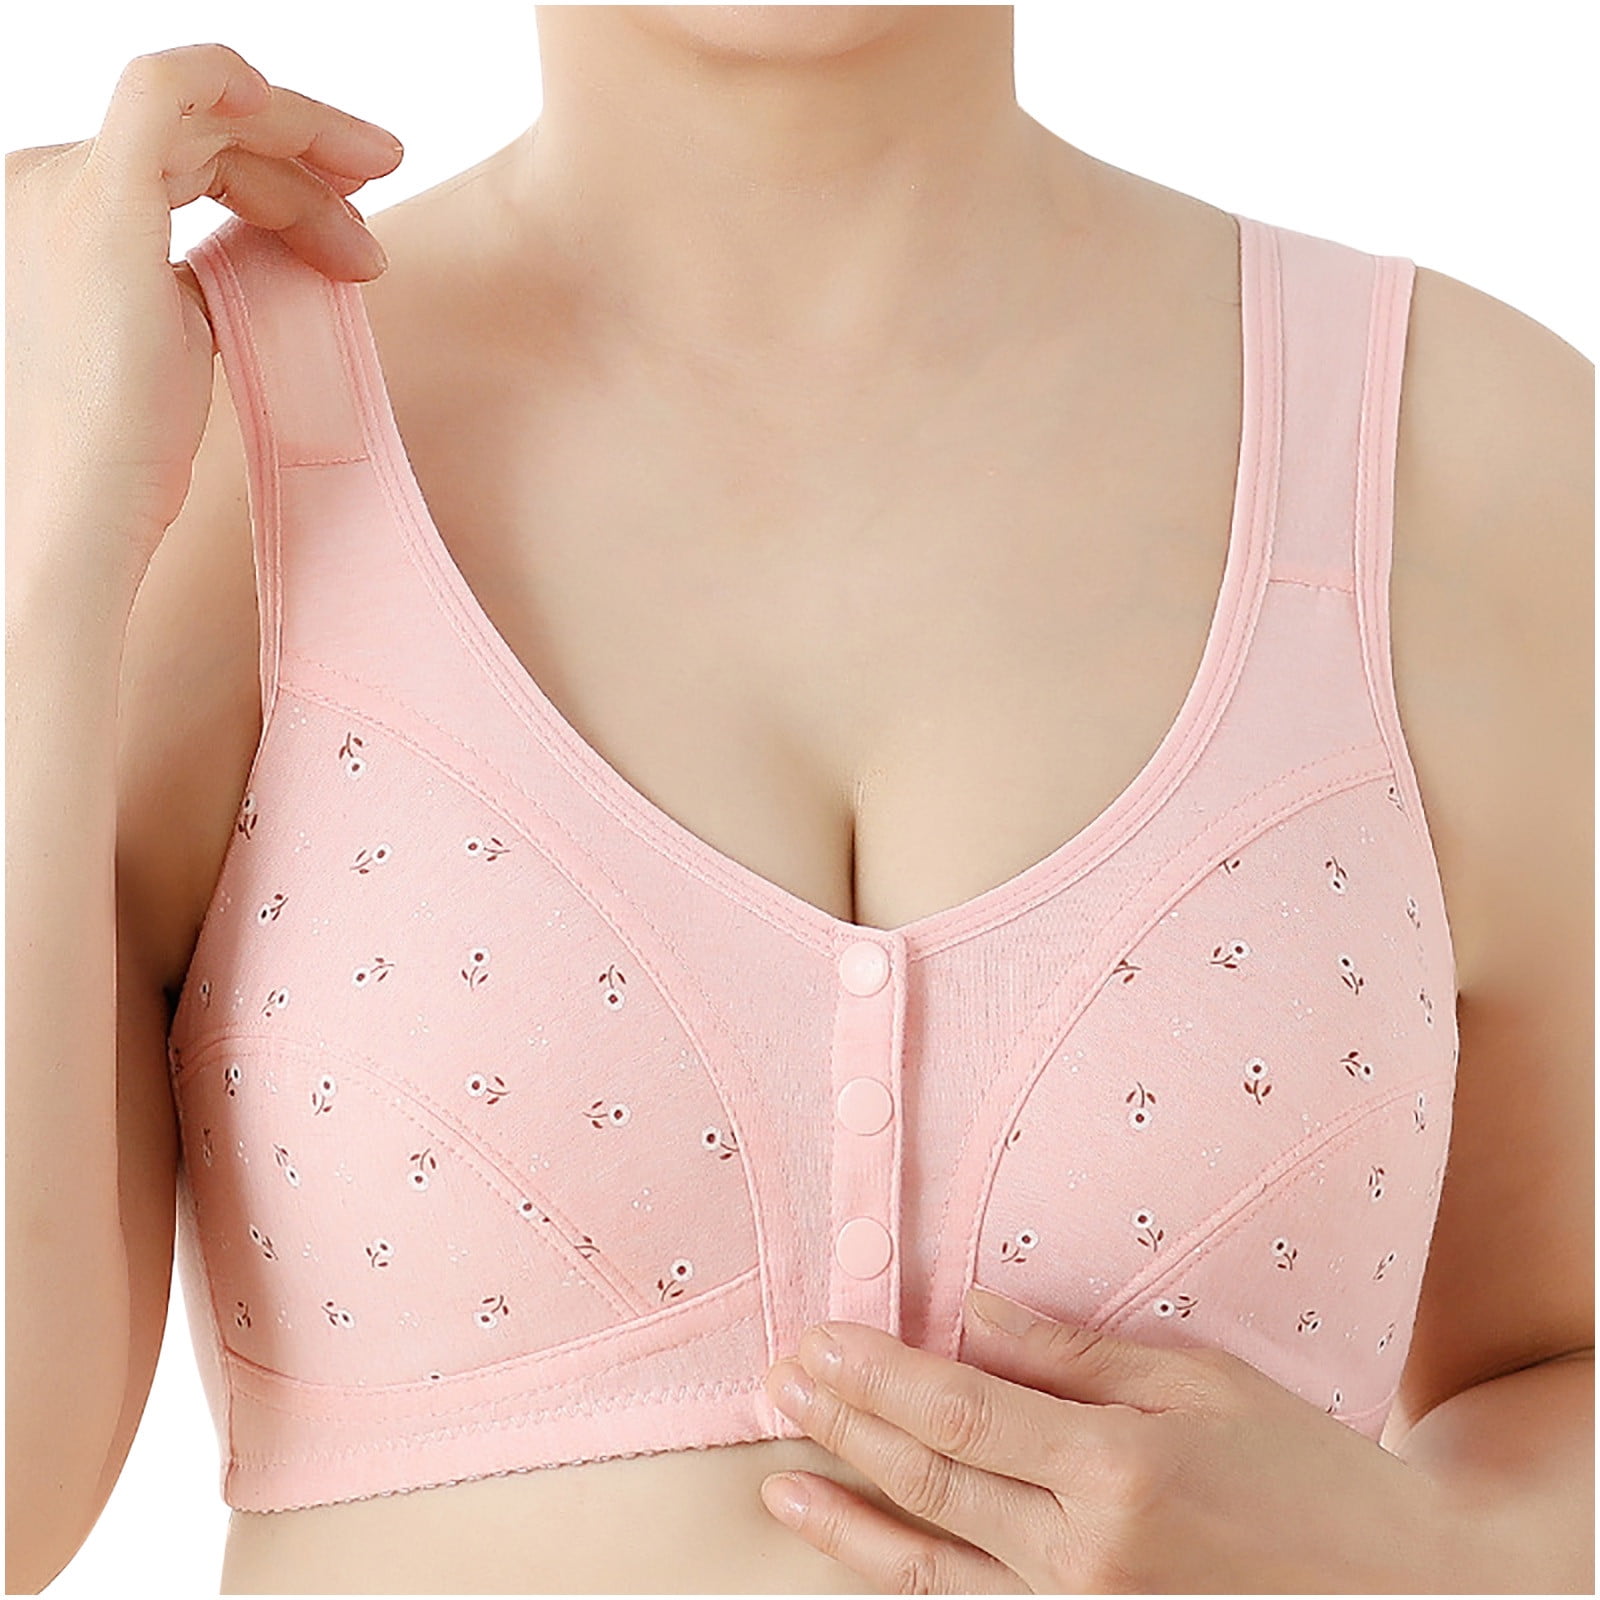 Mrat Clearance Front Closure Bras for Women Printed Push up Mesh